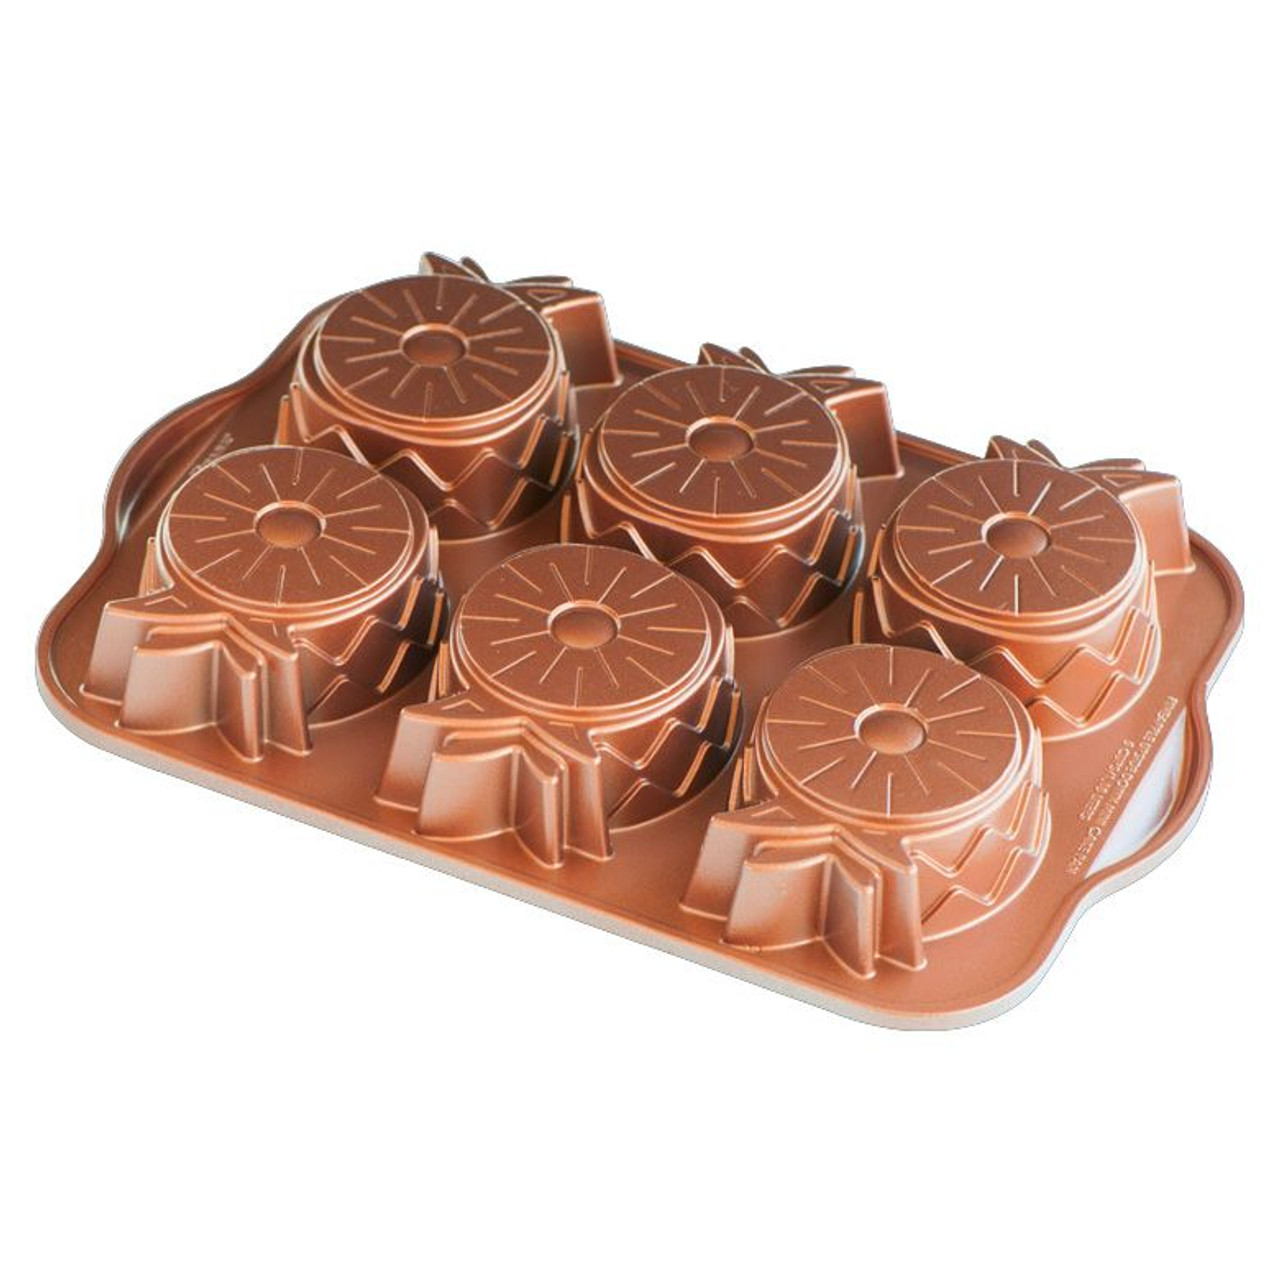  Nordic Ware Cake Pan Pineapple Upsidedown, 8-cup, Sea Glass:  Novelty Cake Pans: Home & Kitchen